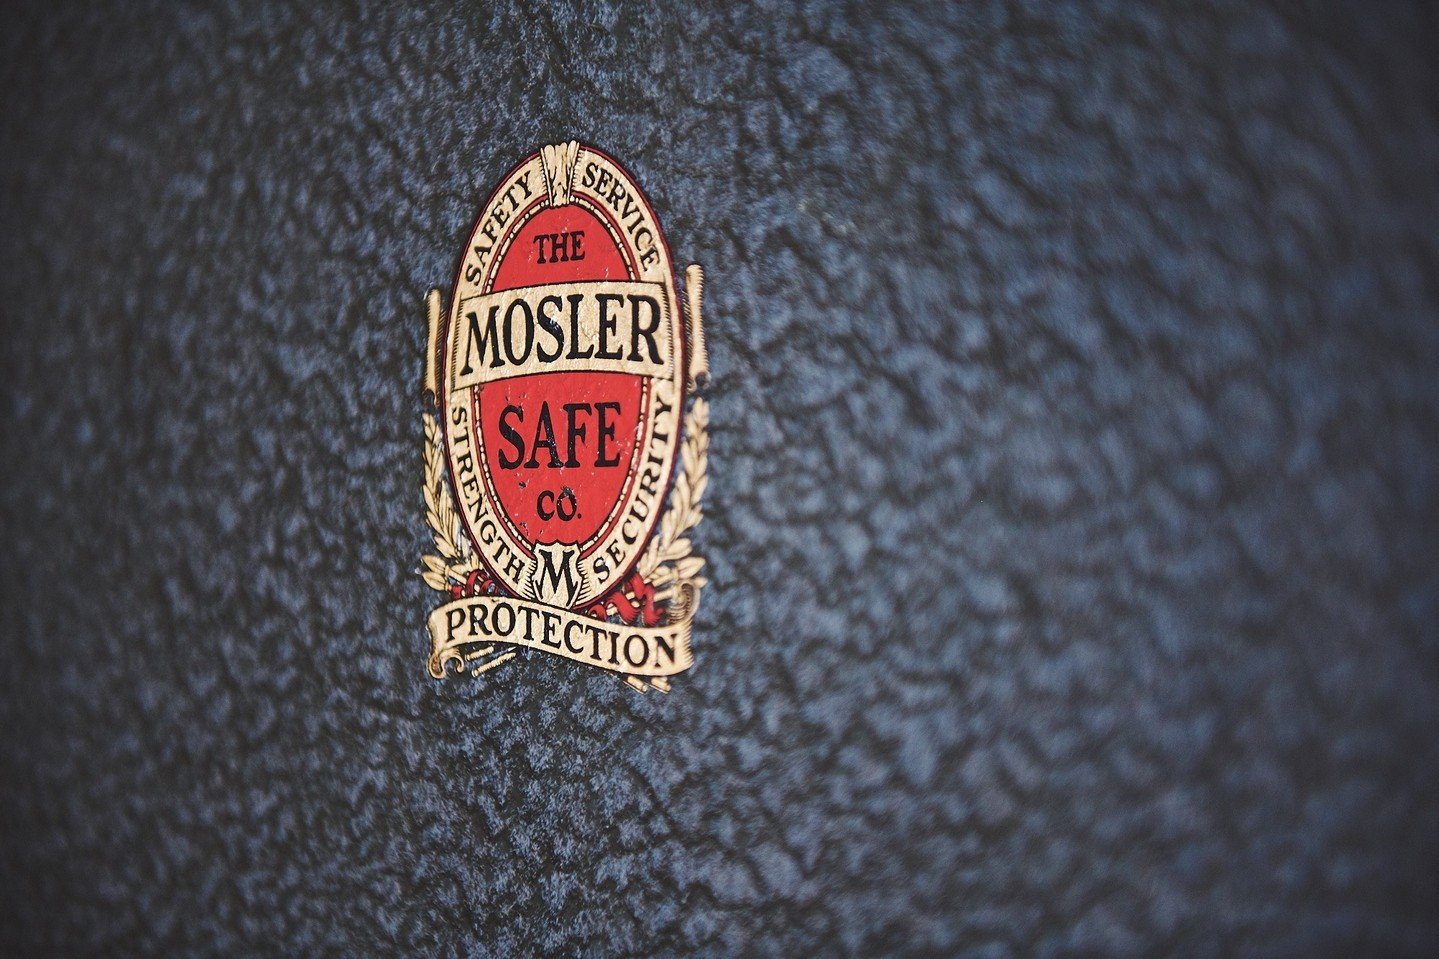 Hidden gems of antiquity in this building⁠, always filled with charm⁠.⁠
&quot;Safety, Service, Strength, Security&quot;⁠
Mosler Safe Co. ⁠
.⁠
.⁠
#SpaceAvailable #IndustrialSpace #CreativeSpace #CreatorSpace #SuiteAvailable #GetYourHandsDirty #Industr